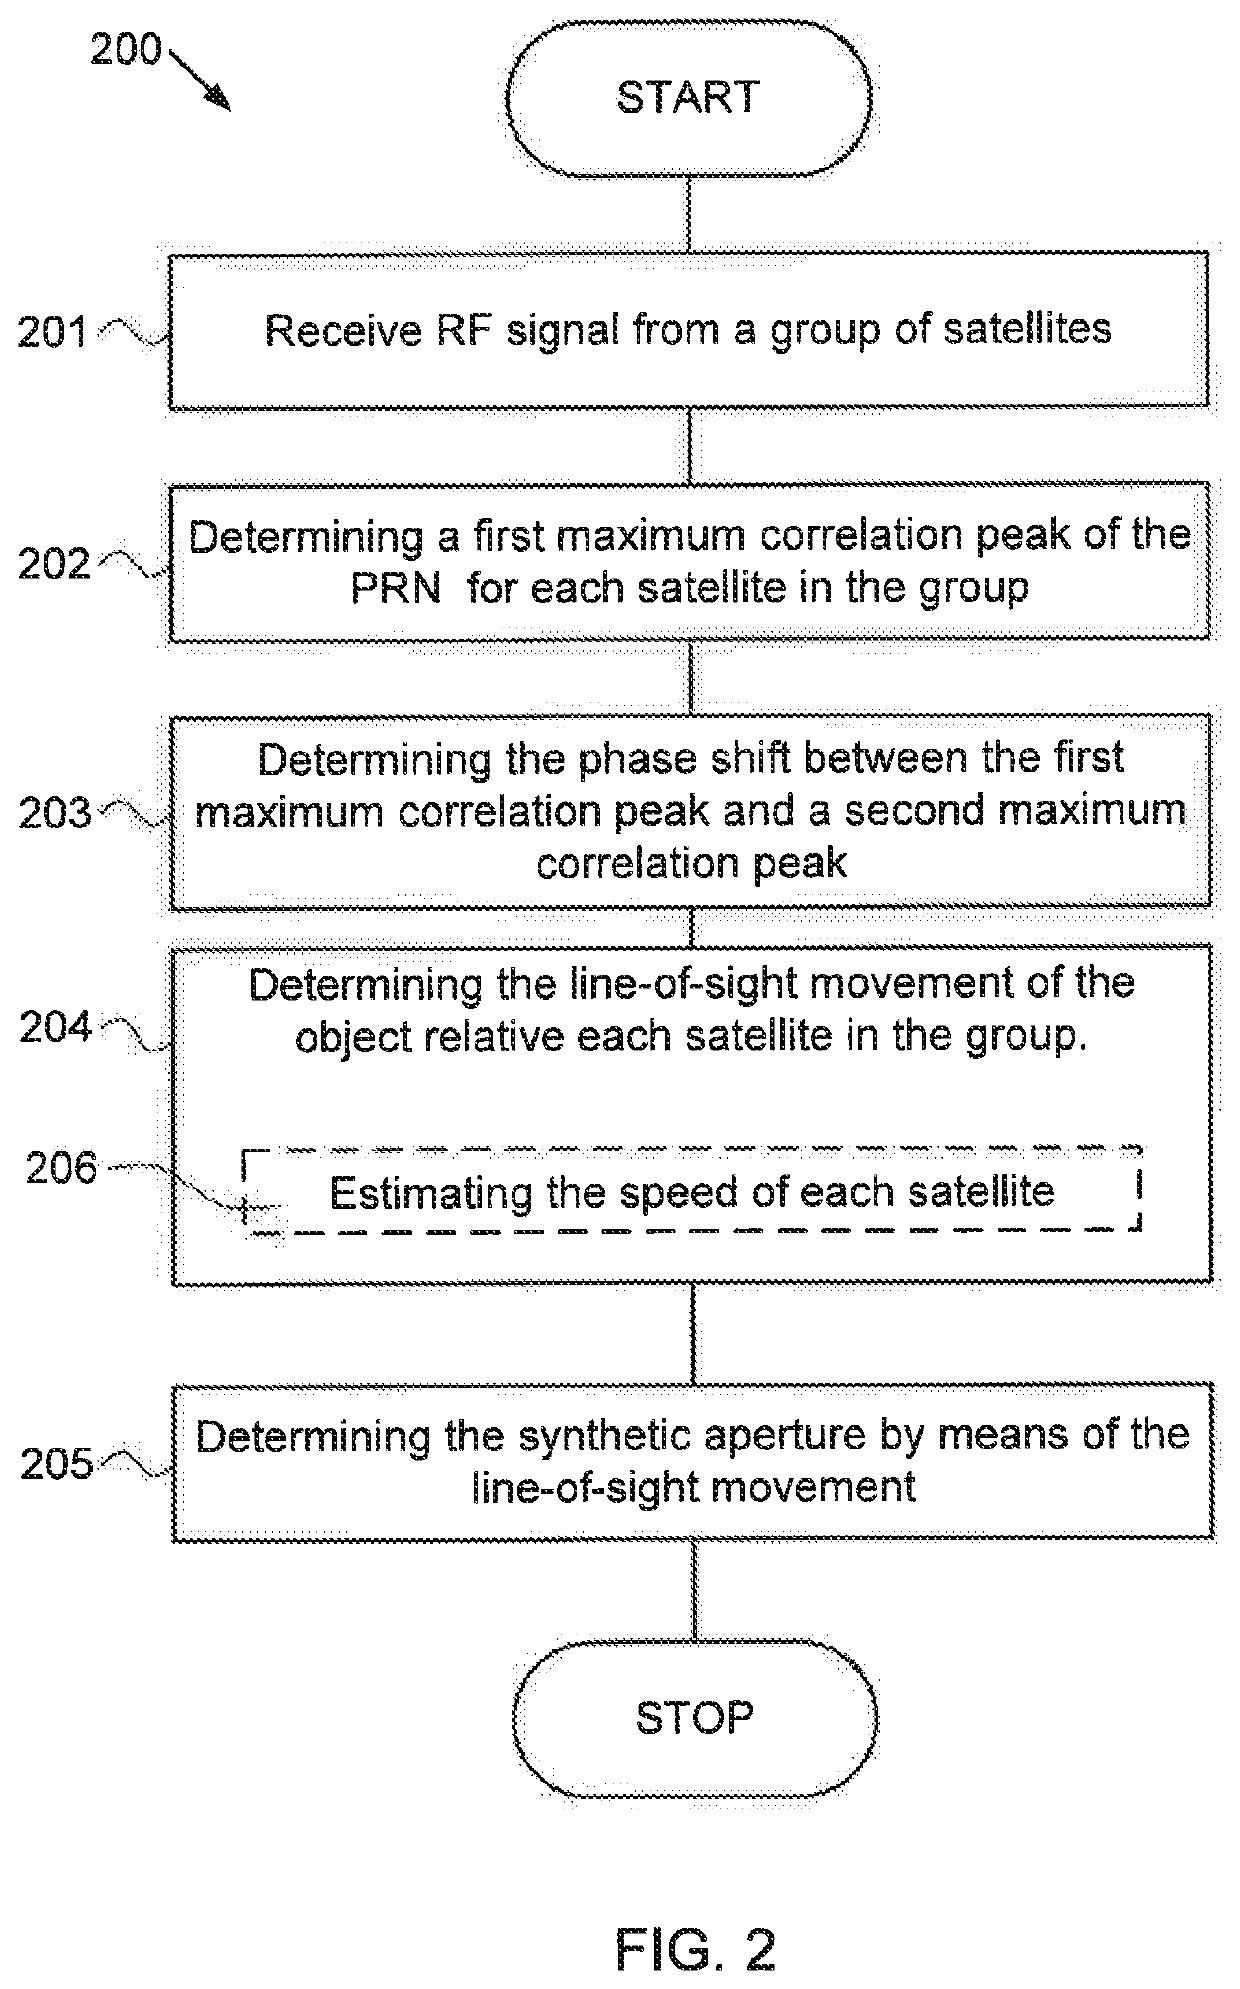 A method for determining the base line for a synthetic aperture of a SAR using GNSS